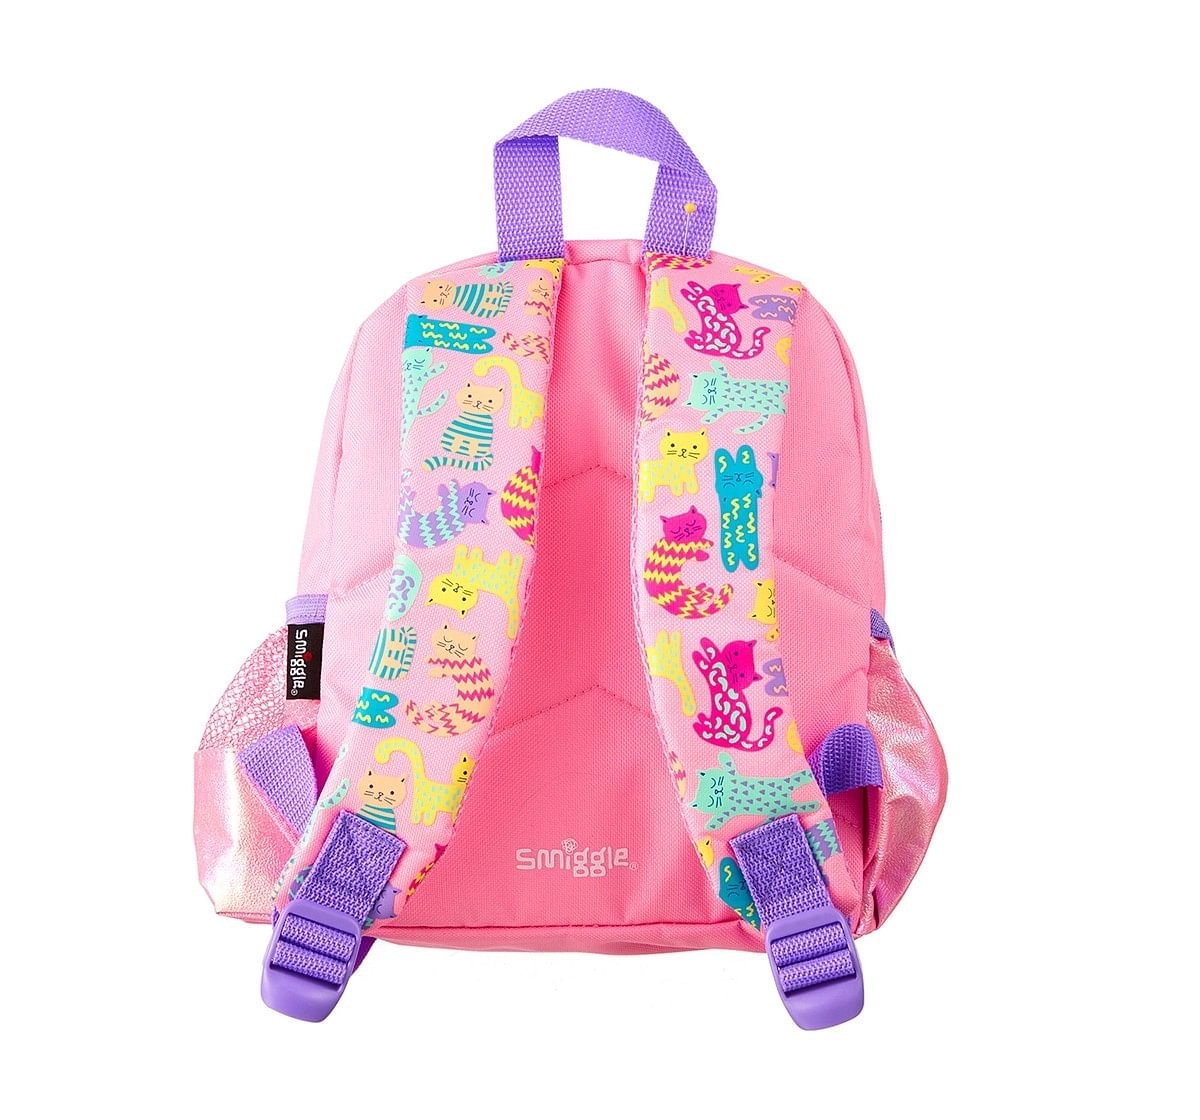 Smiggle Topsy Teeny Tiny Backpack - Cat Print Bags for Kids age 3Y+ (Pink)